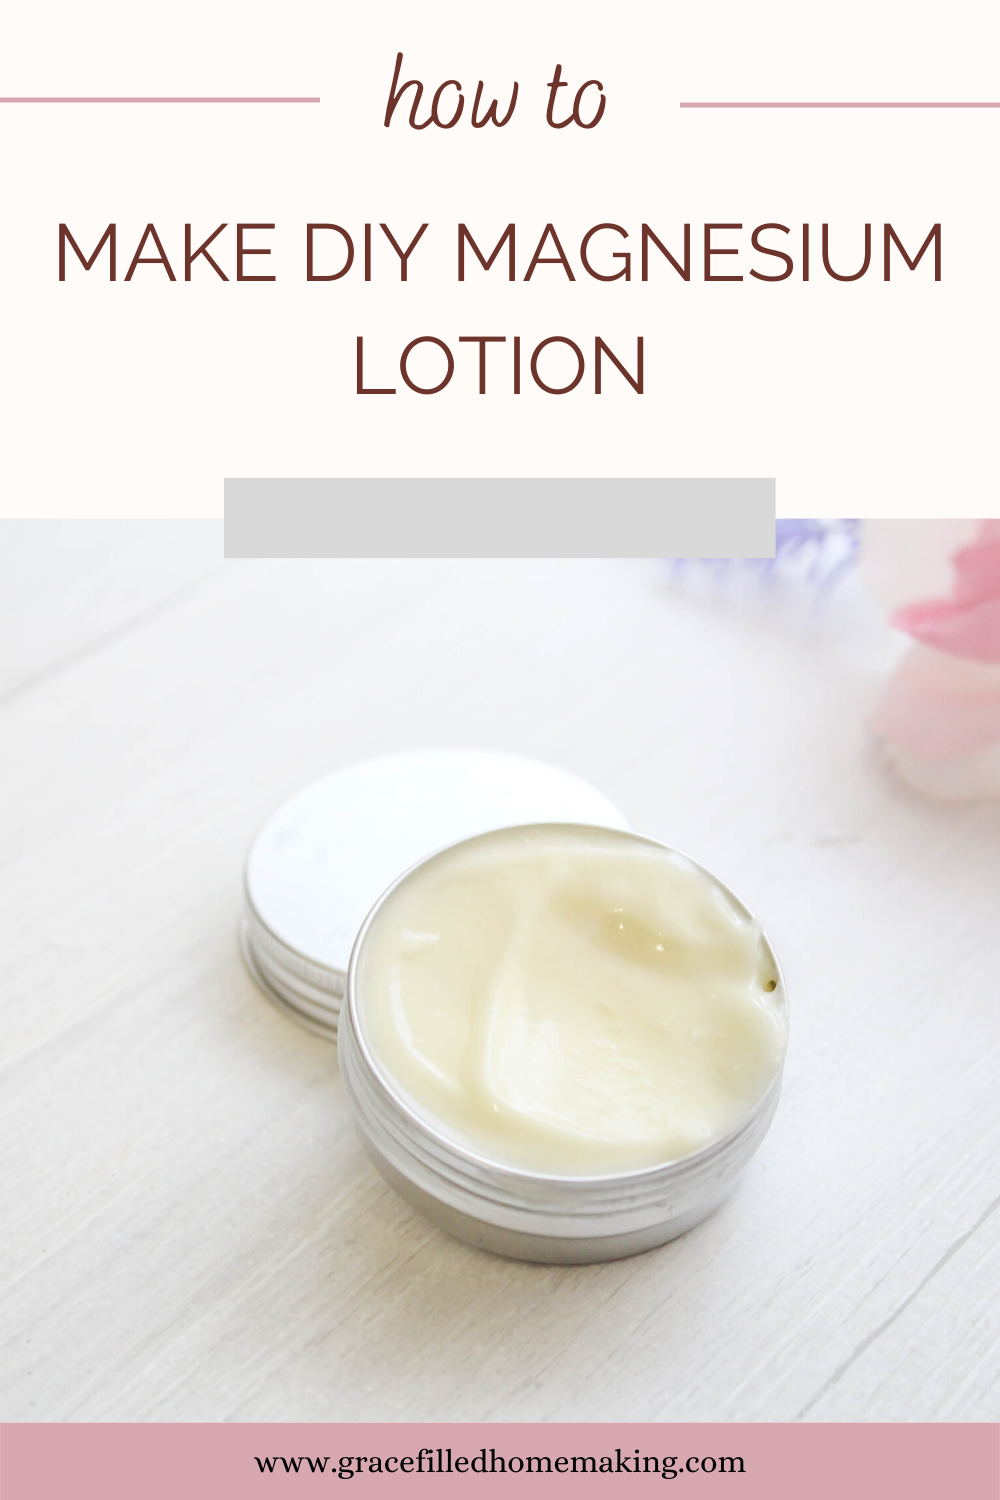 DIY Magnesium Lotion is a perfect remedy for sleepless nights, sore muscles, and more! 

#naturaldiys #essentialoils #crunchy